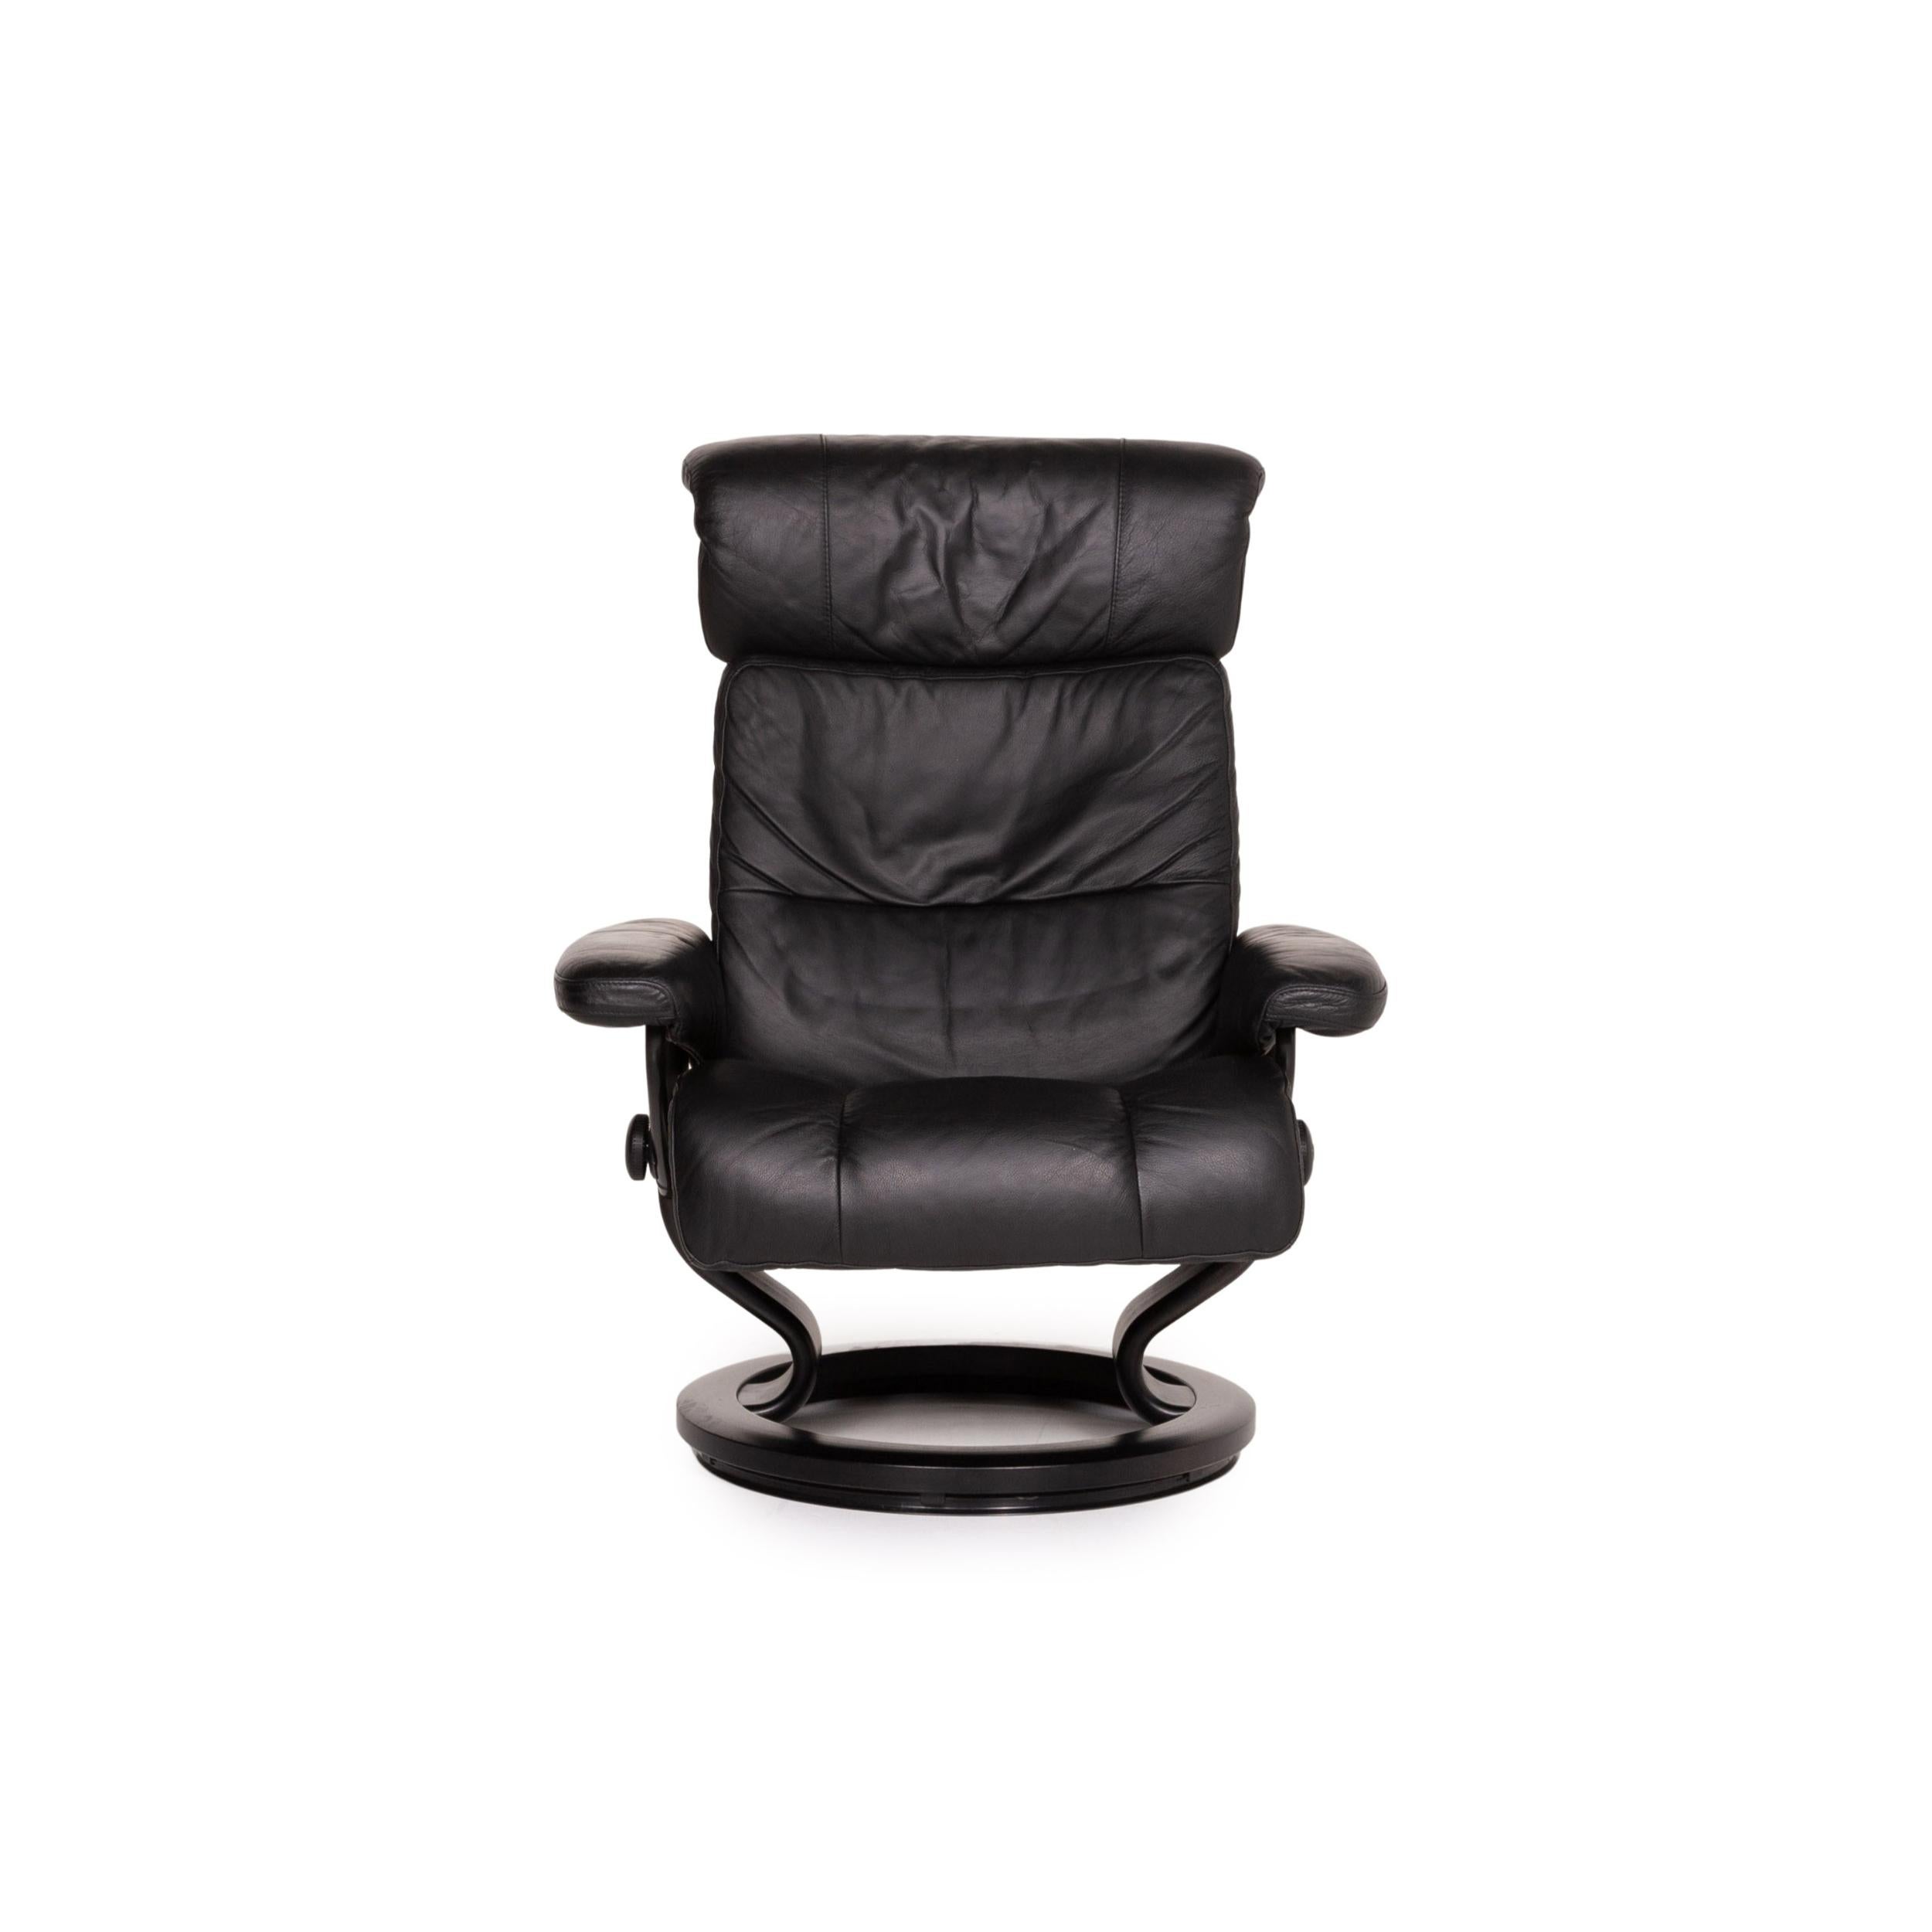 Stressless Memphis Leather Armchair Size M Incl. Black Stool Function Relax 2